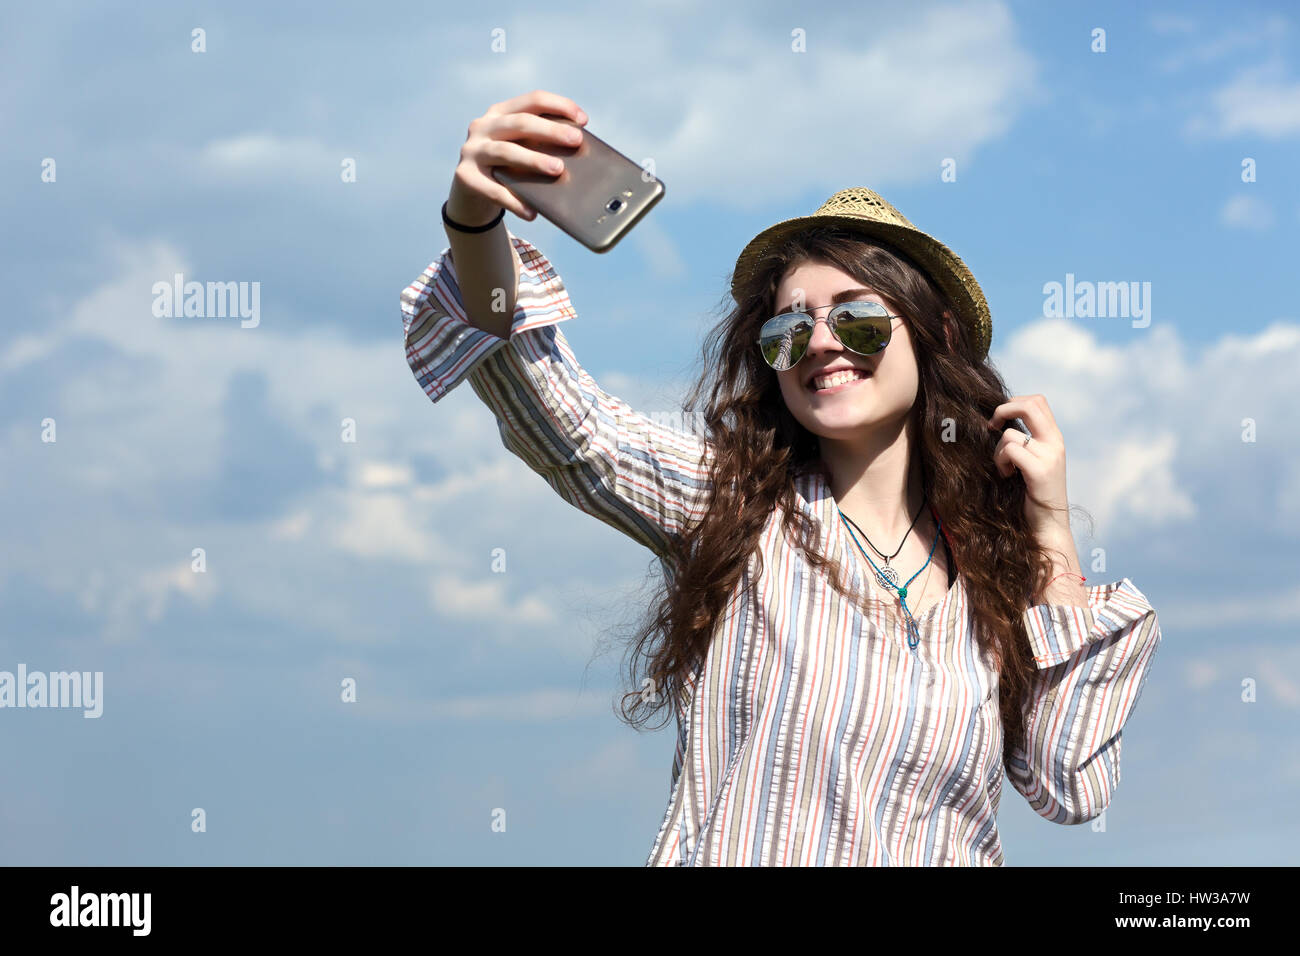 Girl hippie Style Clothing casual Shirt Hat Sunglasses and other accessories taking self portrait photo on mobile telephone camera on blue sky and sum Stock Photo